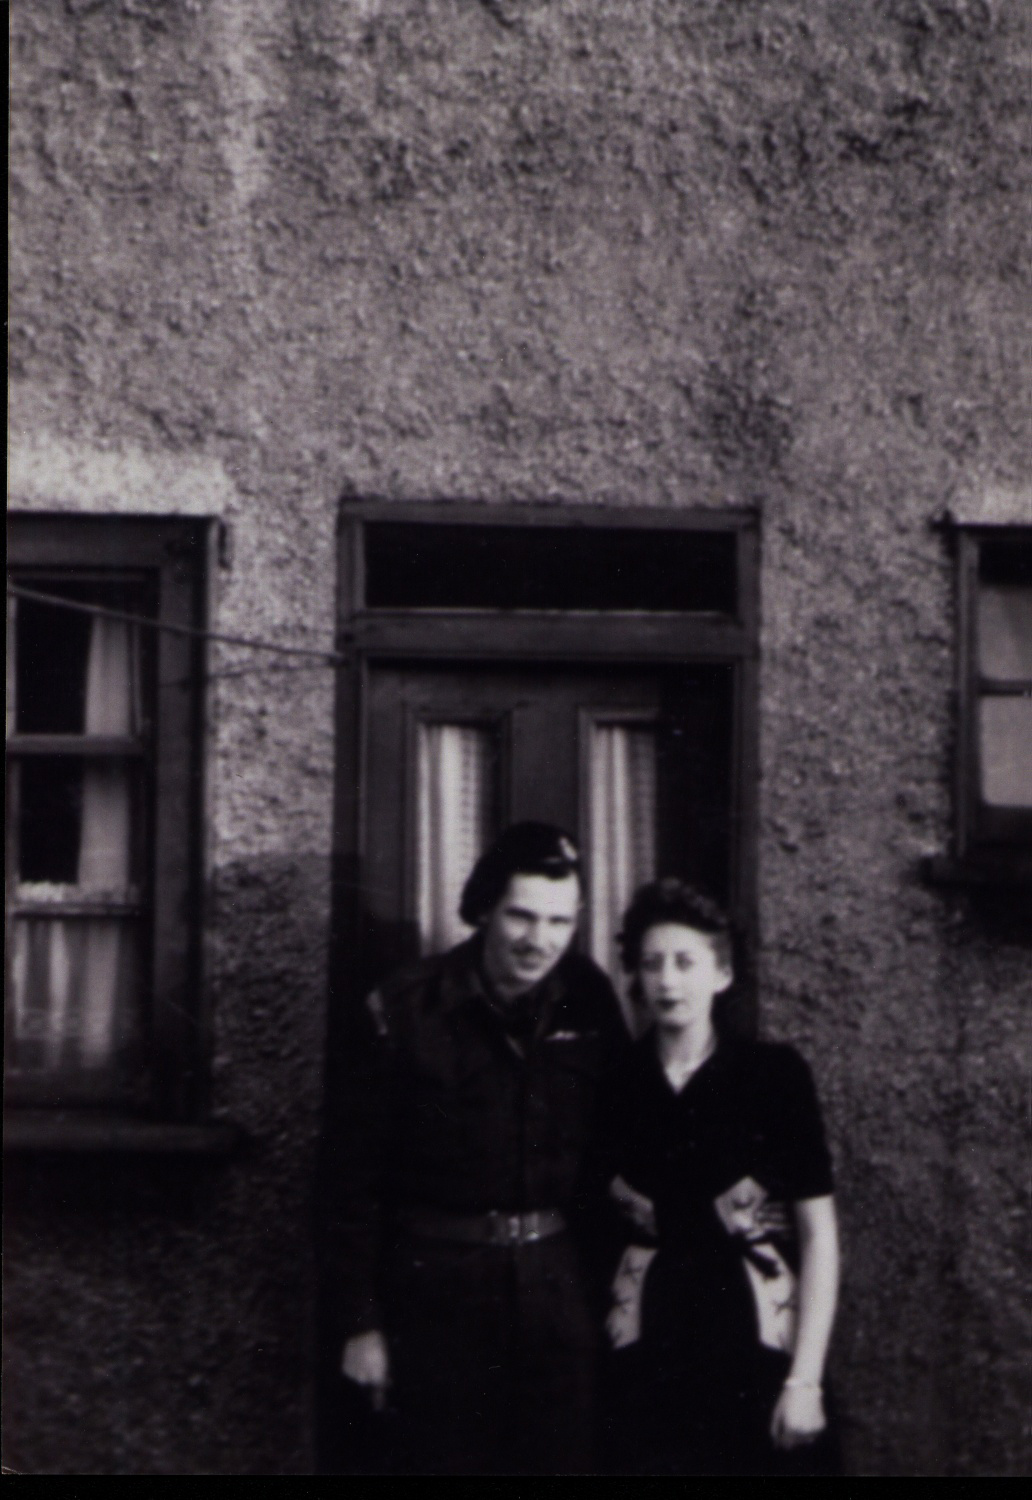 Man and woman standing in front of building.